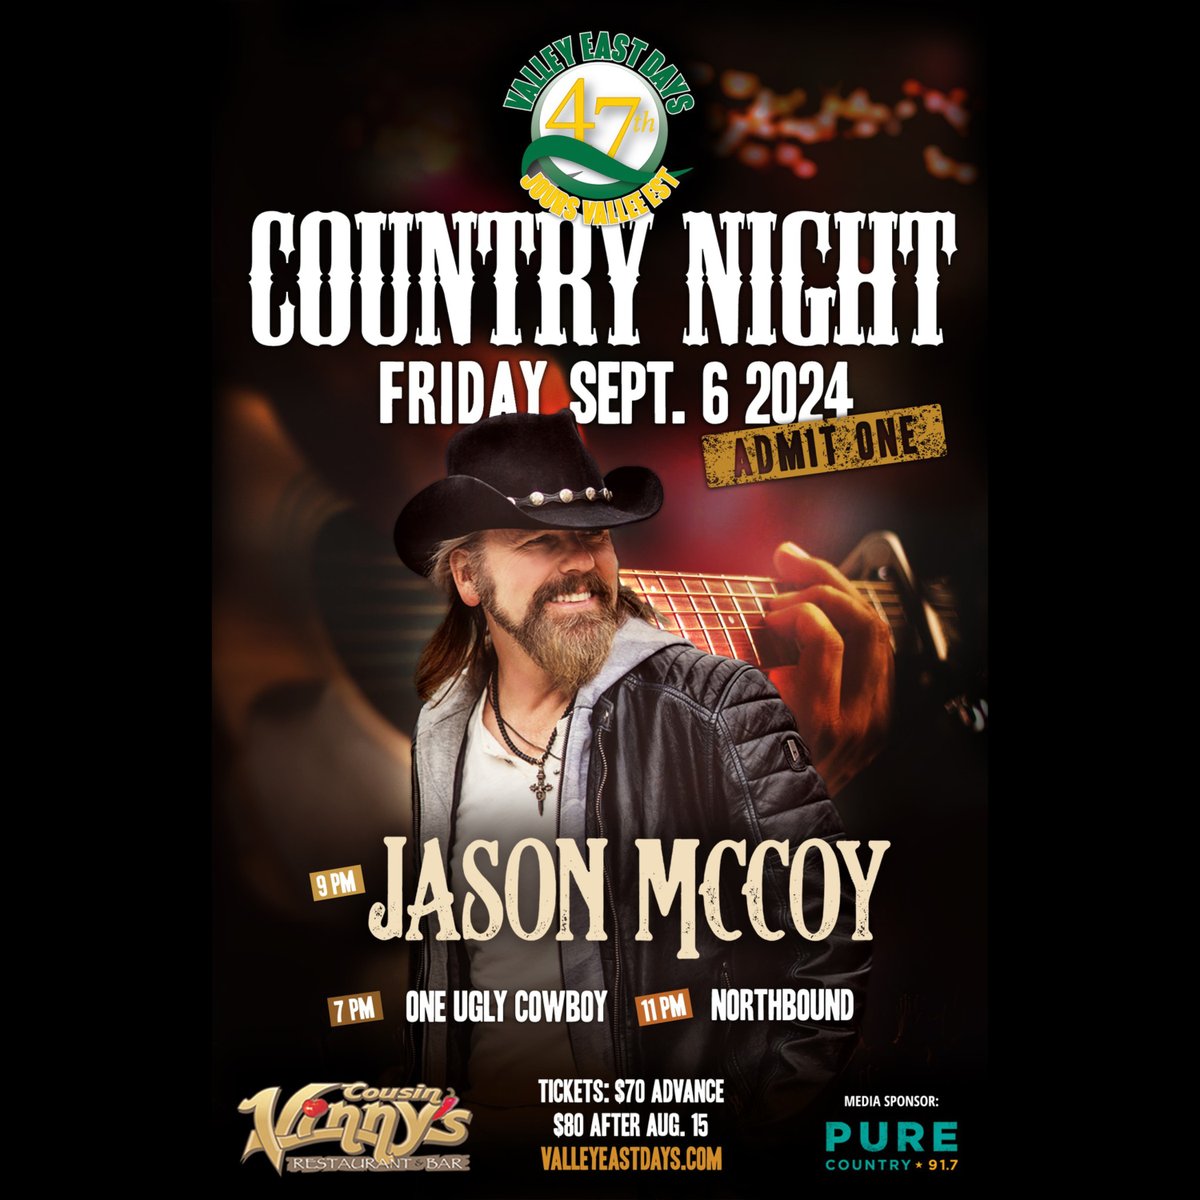 Sudbury show announcement! 💛 Super thrilled to be opening for Jason McCoy at Valley East Days on Friday Sept. 6th. We'll be hitting the stage 7-8:30pm. Gonna be a ROCKIN' night of pure country/rock fun !!! 🤠 oneuglycowboy.com INFO: valleyeastdays.com/countrynight